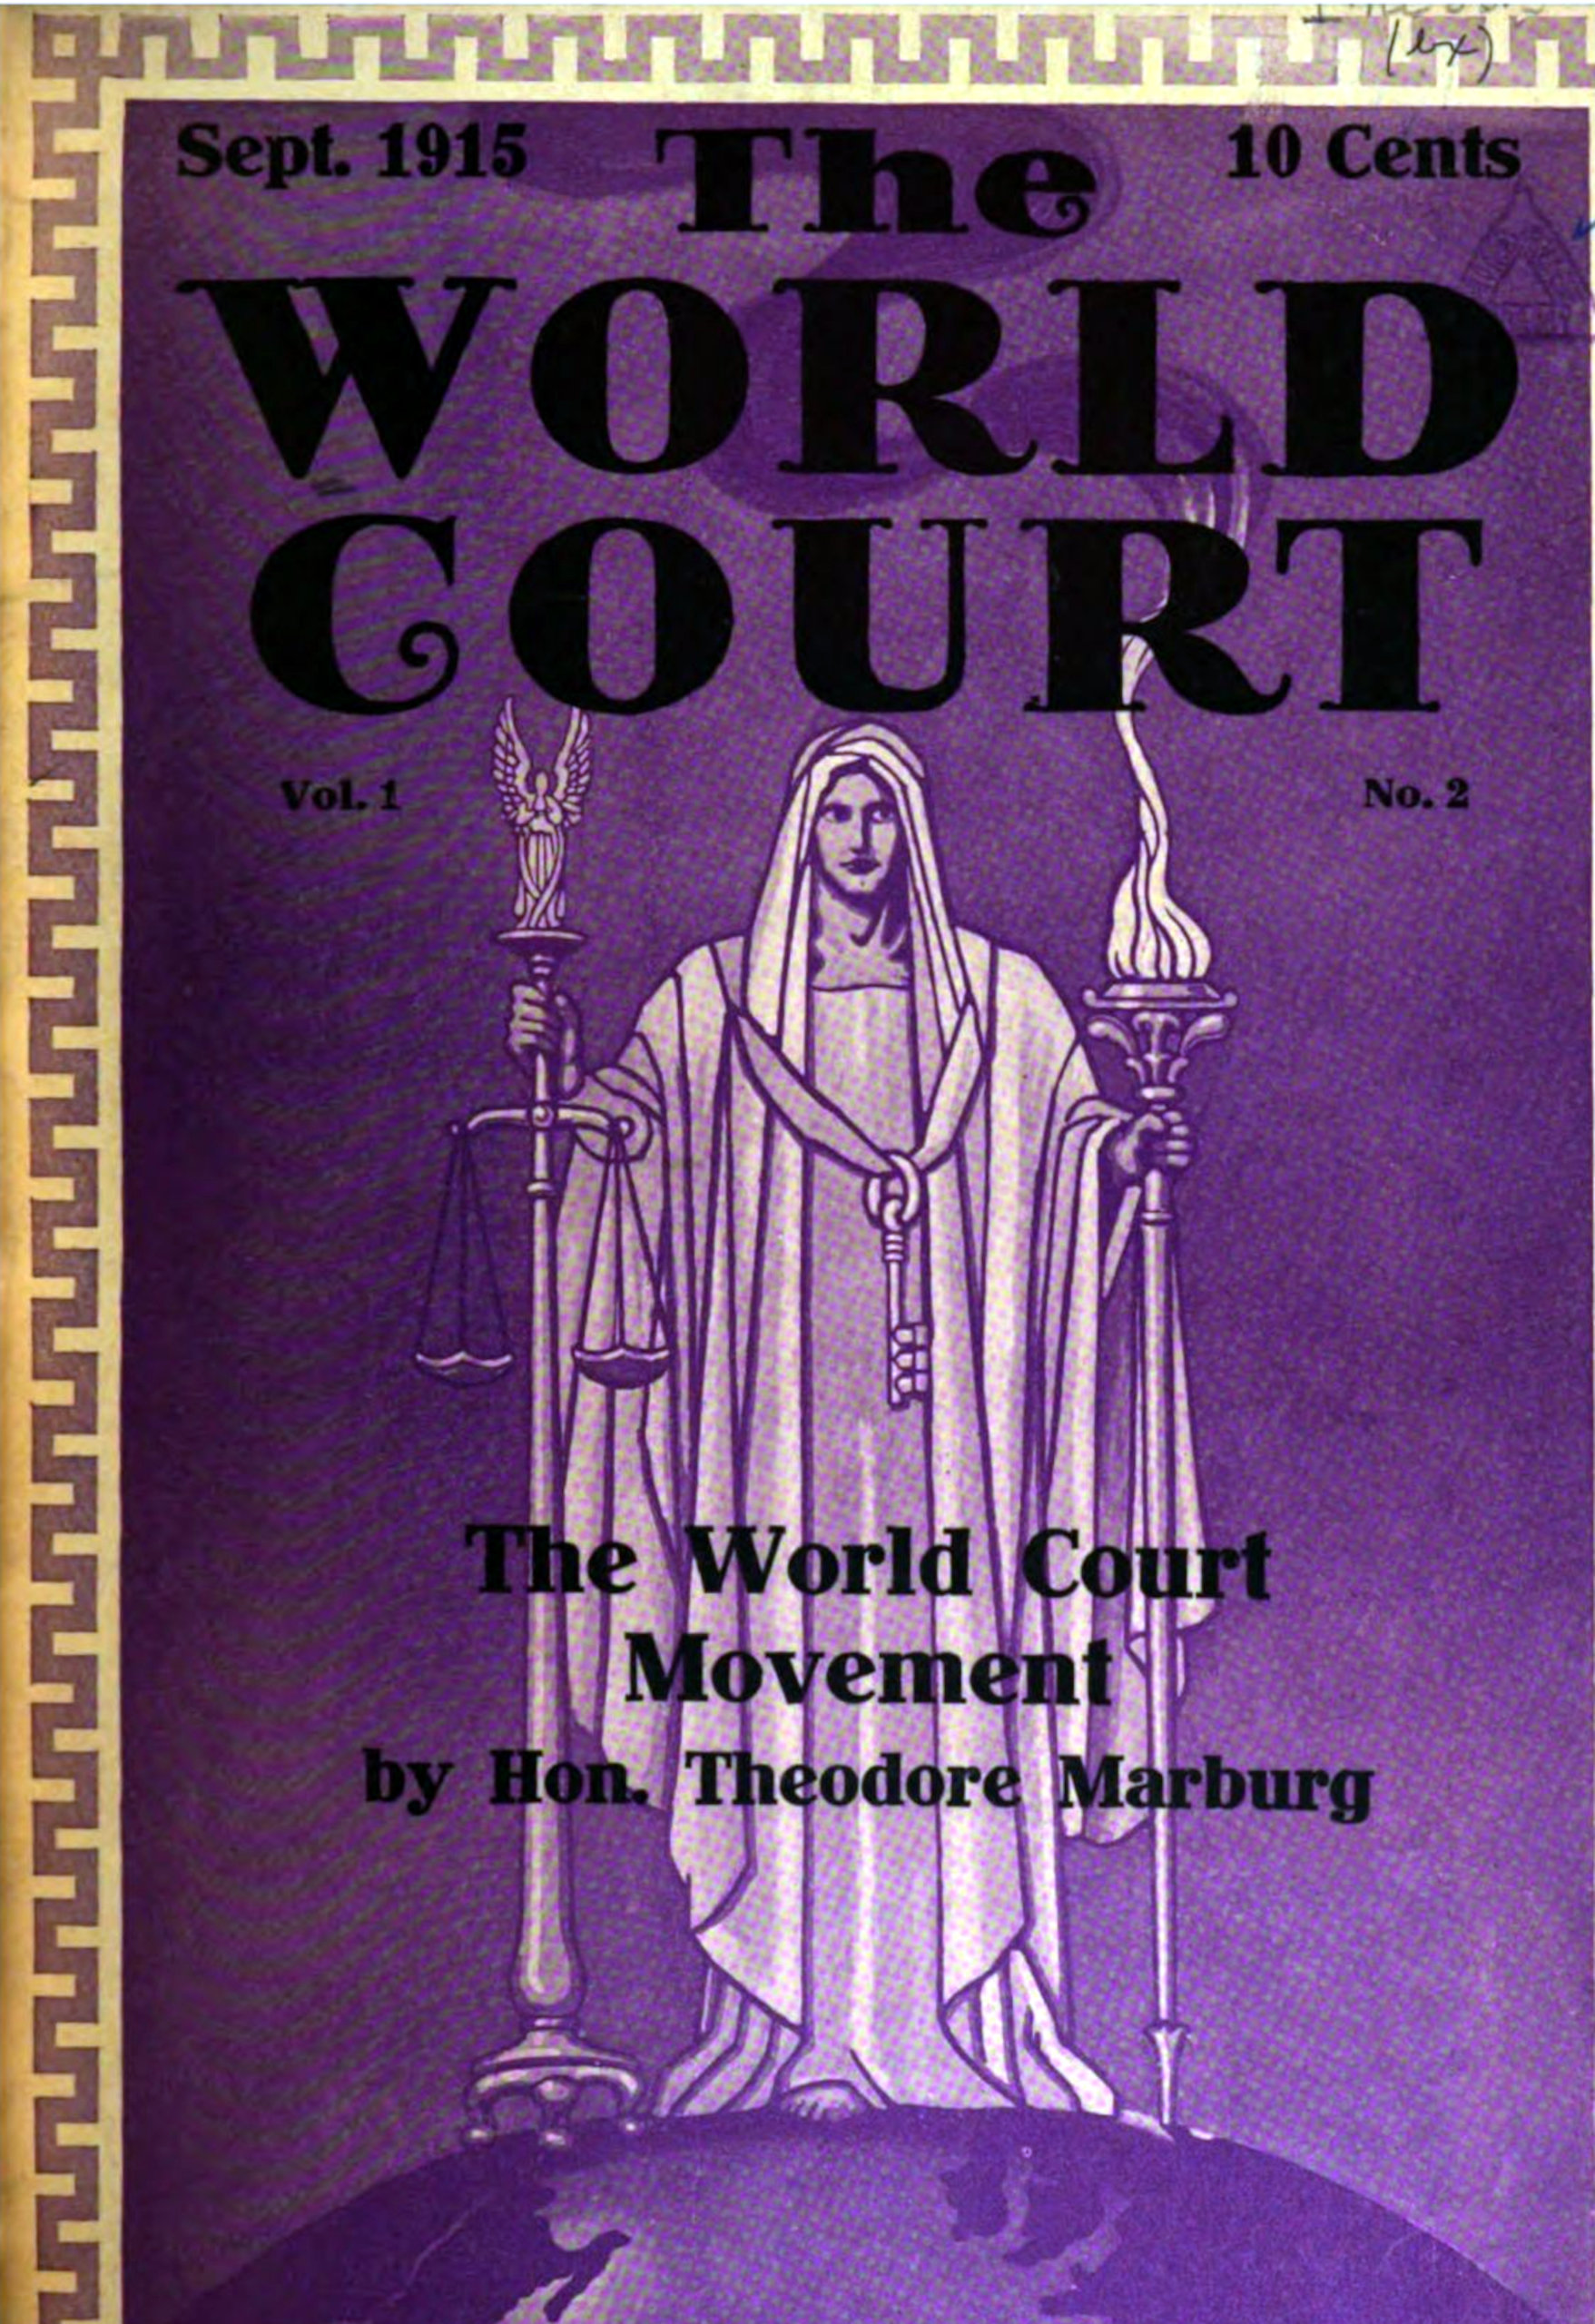 Sept. 1915 10 Cents The WORLD COURT Vol. 1 No. 2 The World Court Movement by Hon. Theodore Marburg